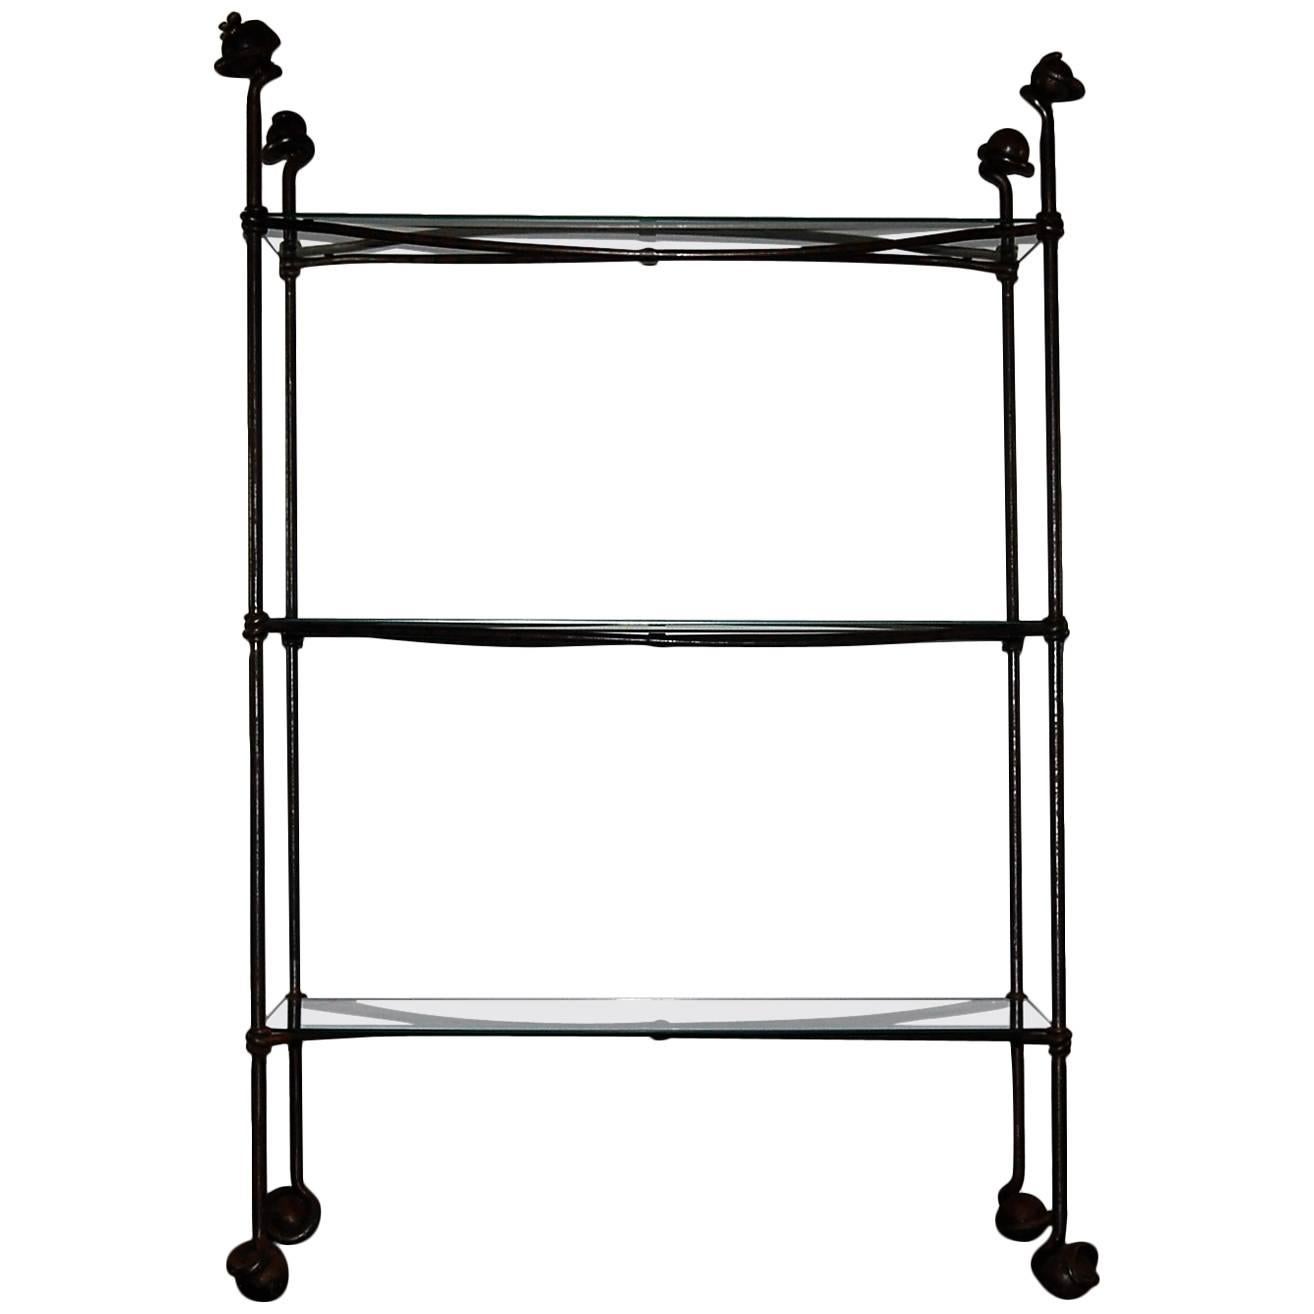 Wrought Iron and Glass Apothecary Display Shelf